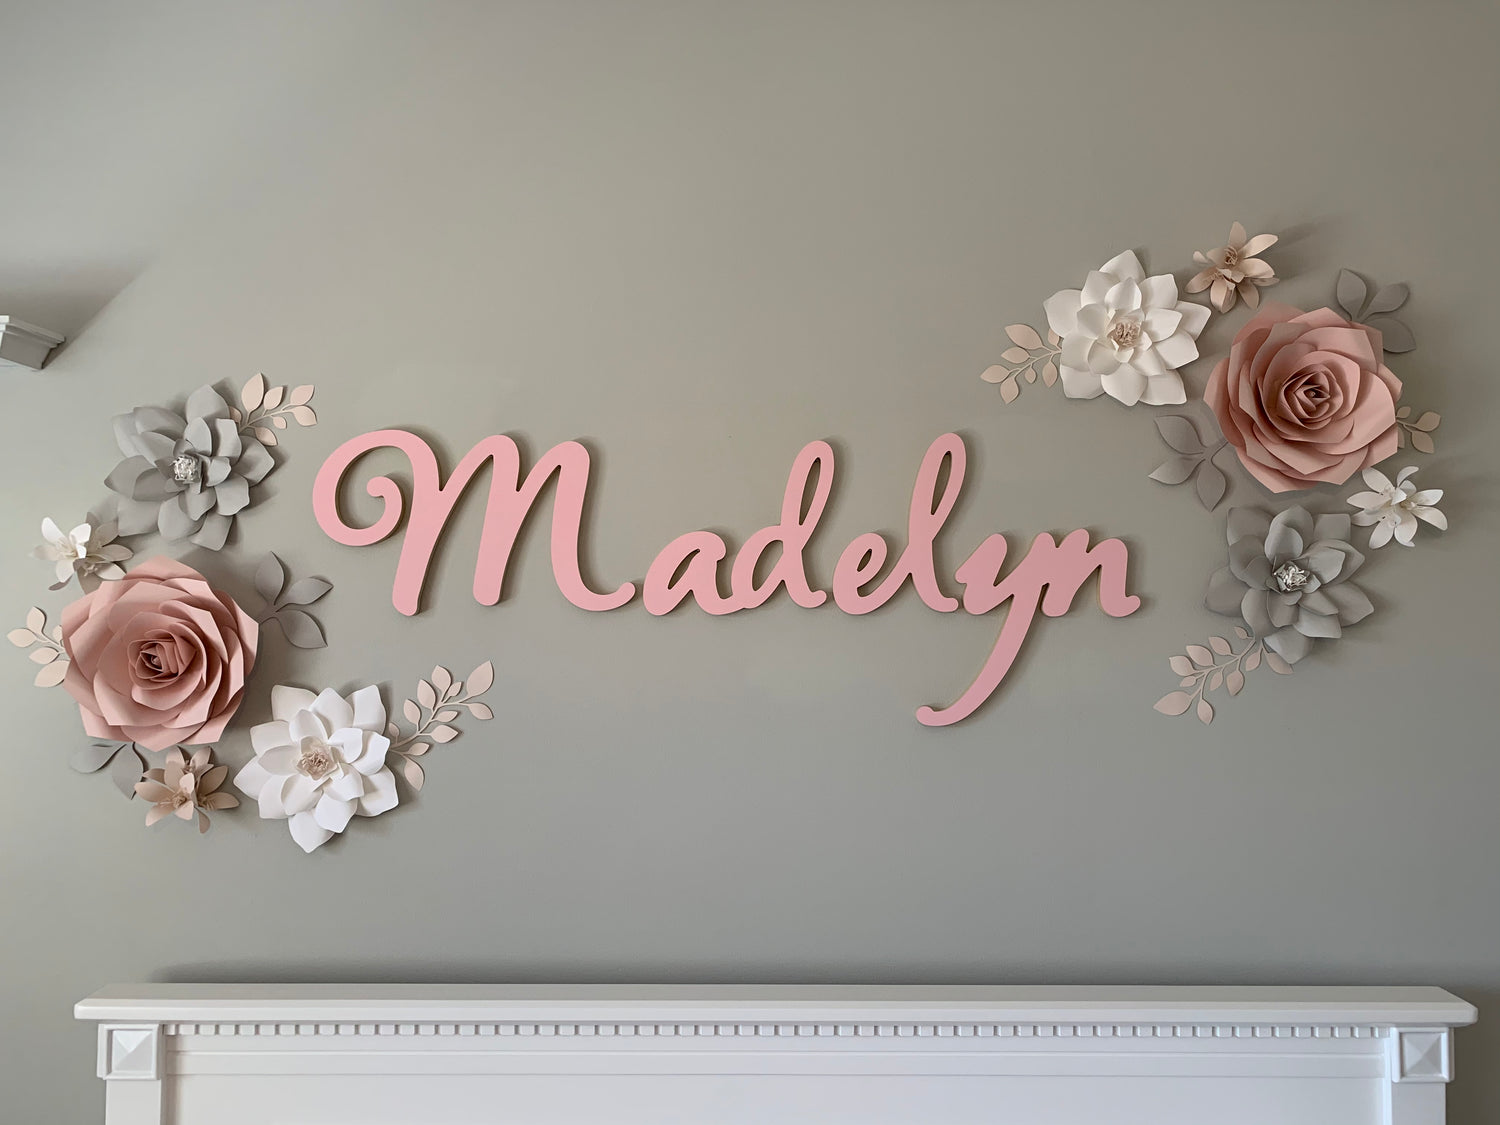 Personalized nursery name sign in pink